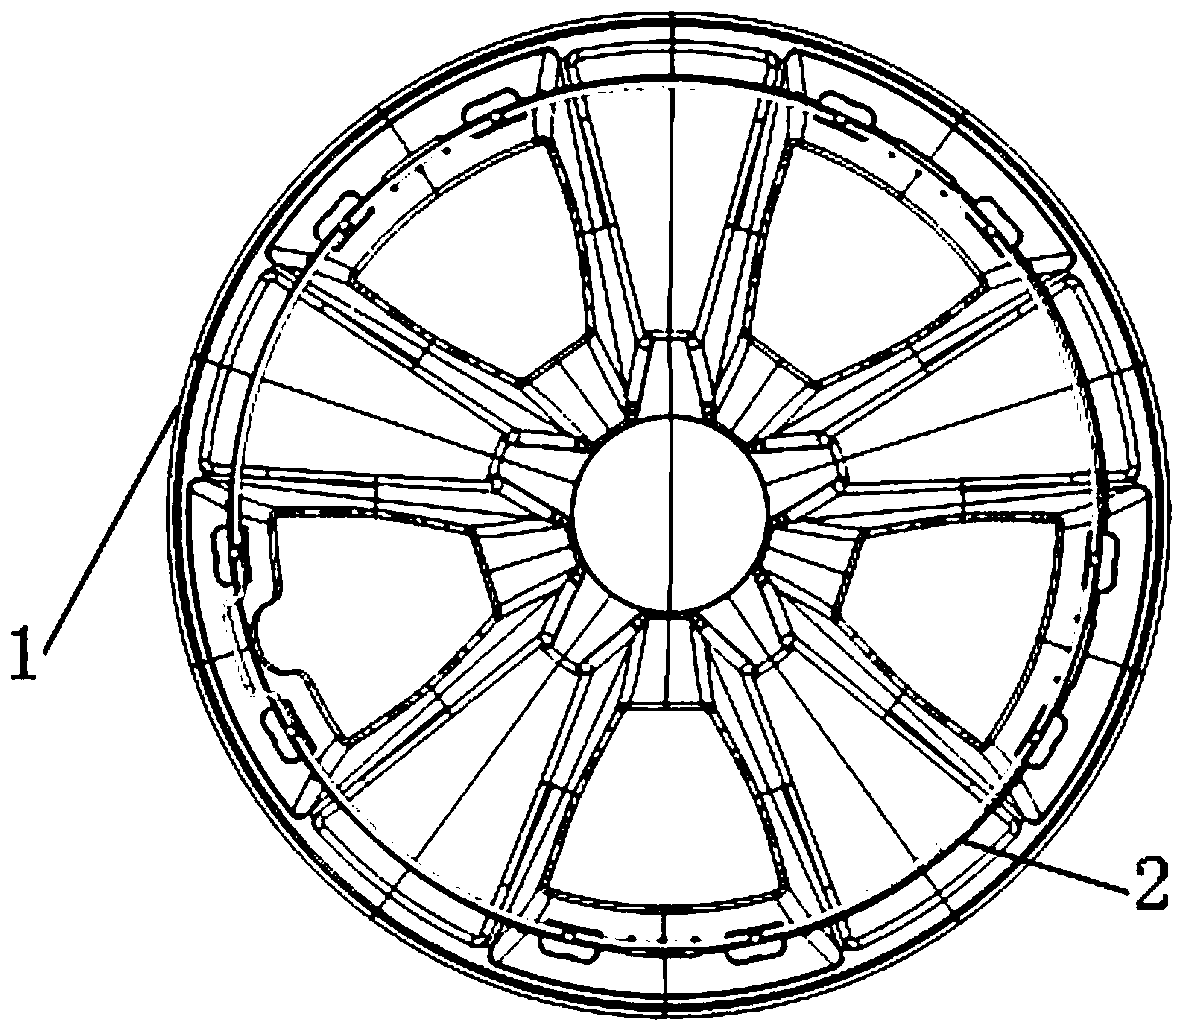 Wheel cover structure